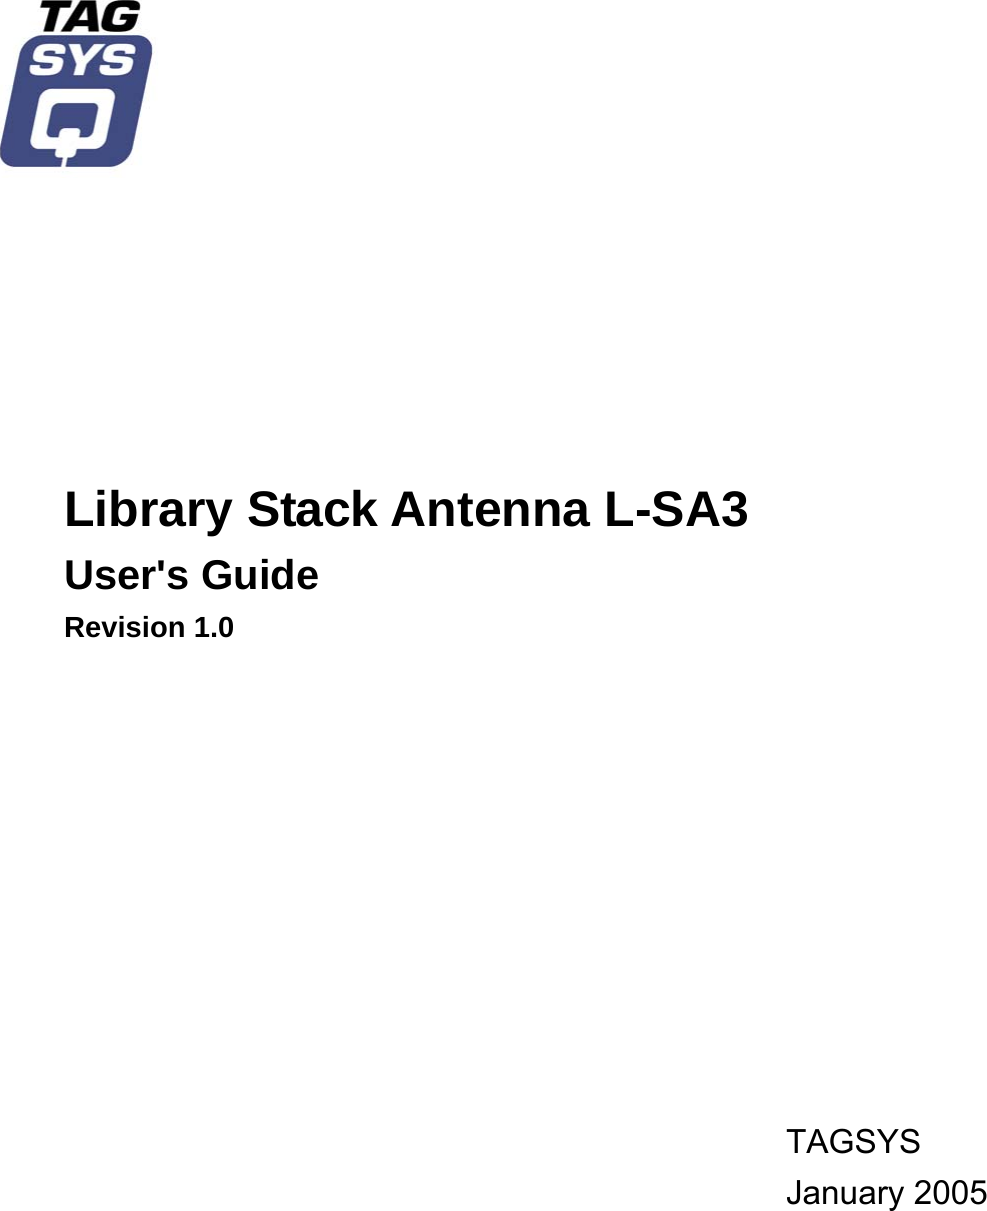               Library Stack Antenna L-SA3 User&apos;s Guide Revision 1.0             TAGSYS January 2005   